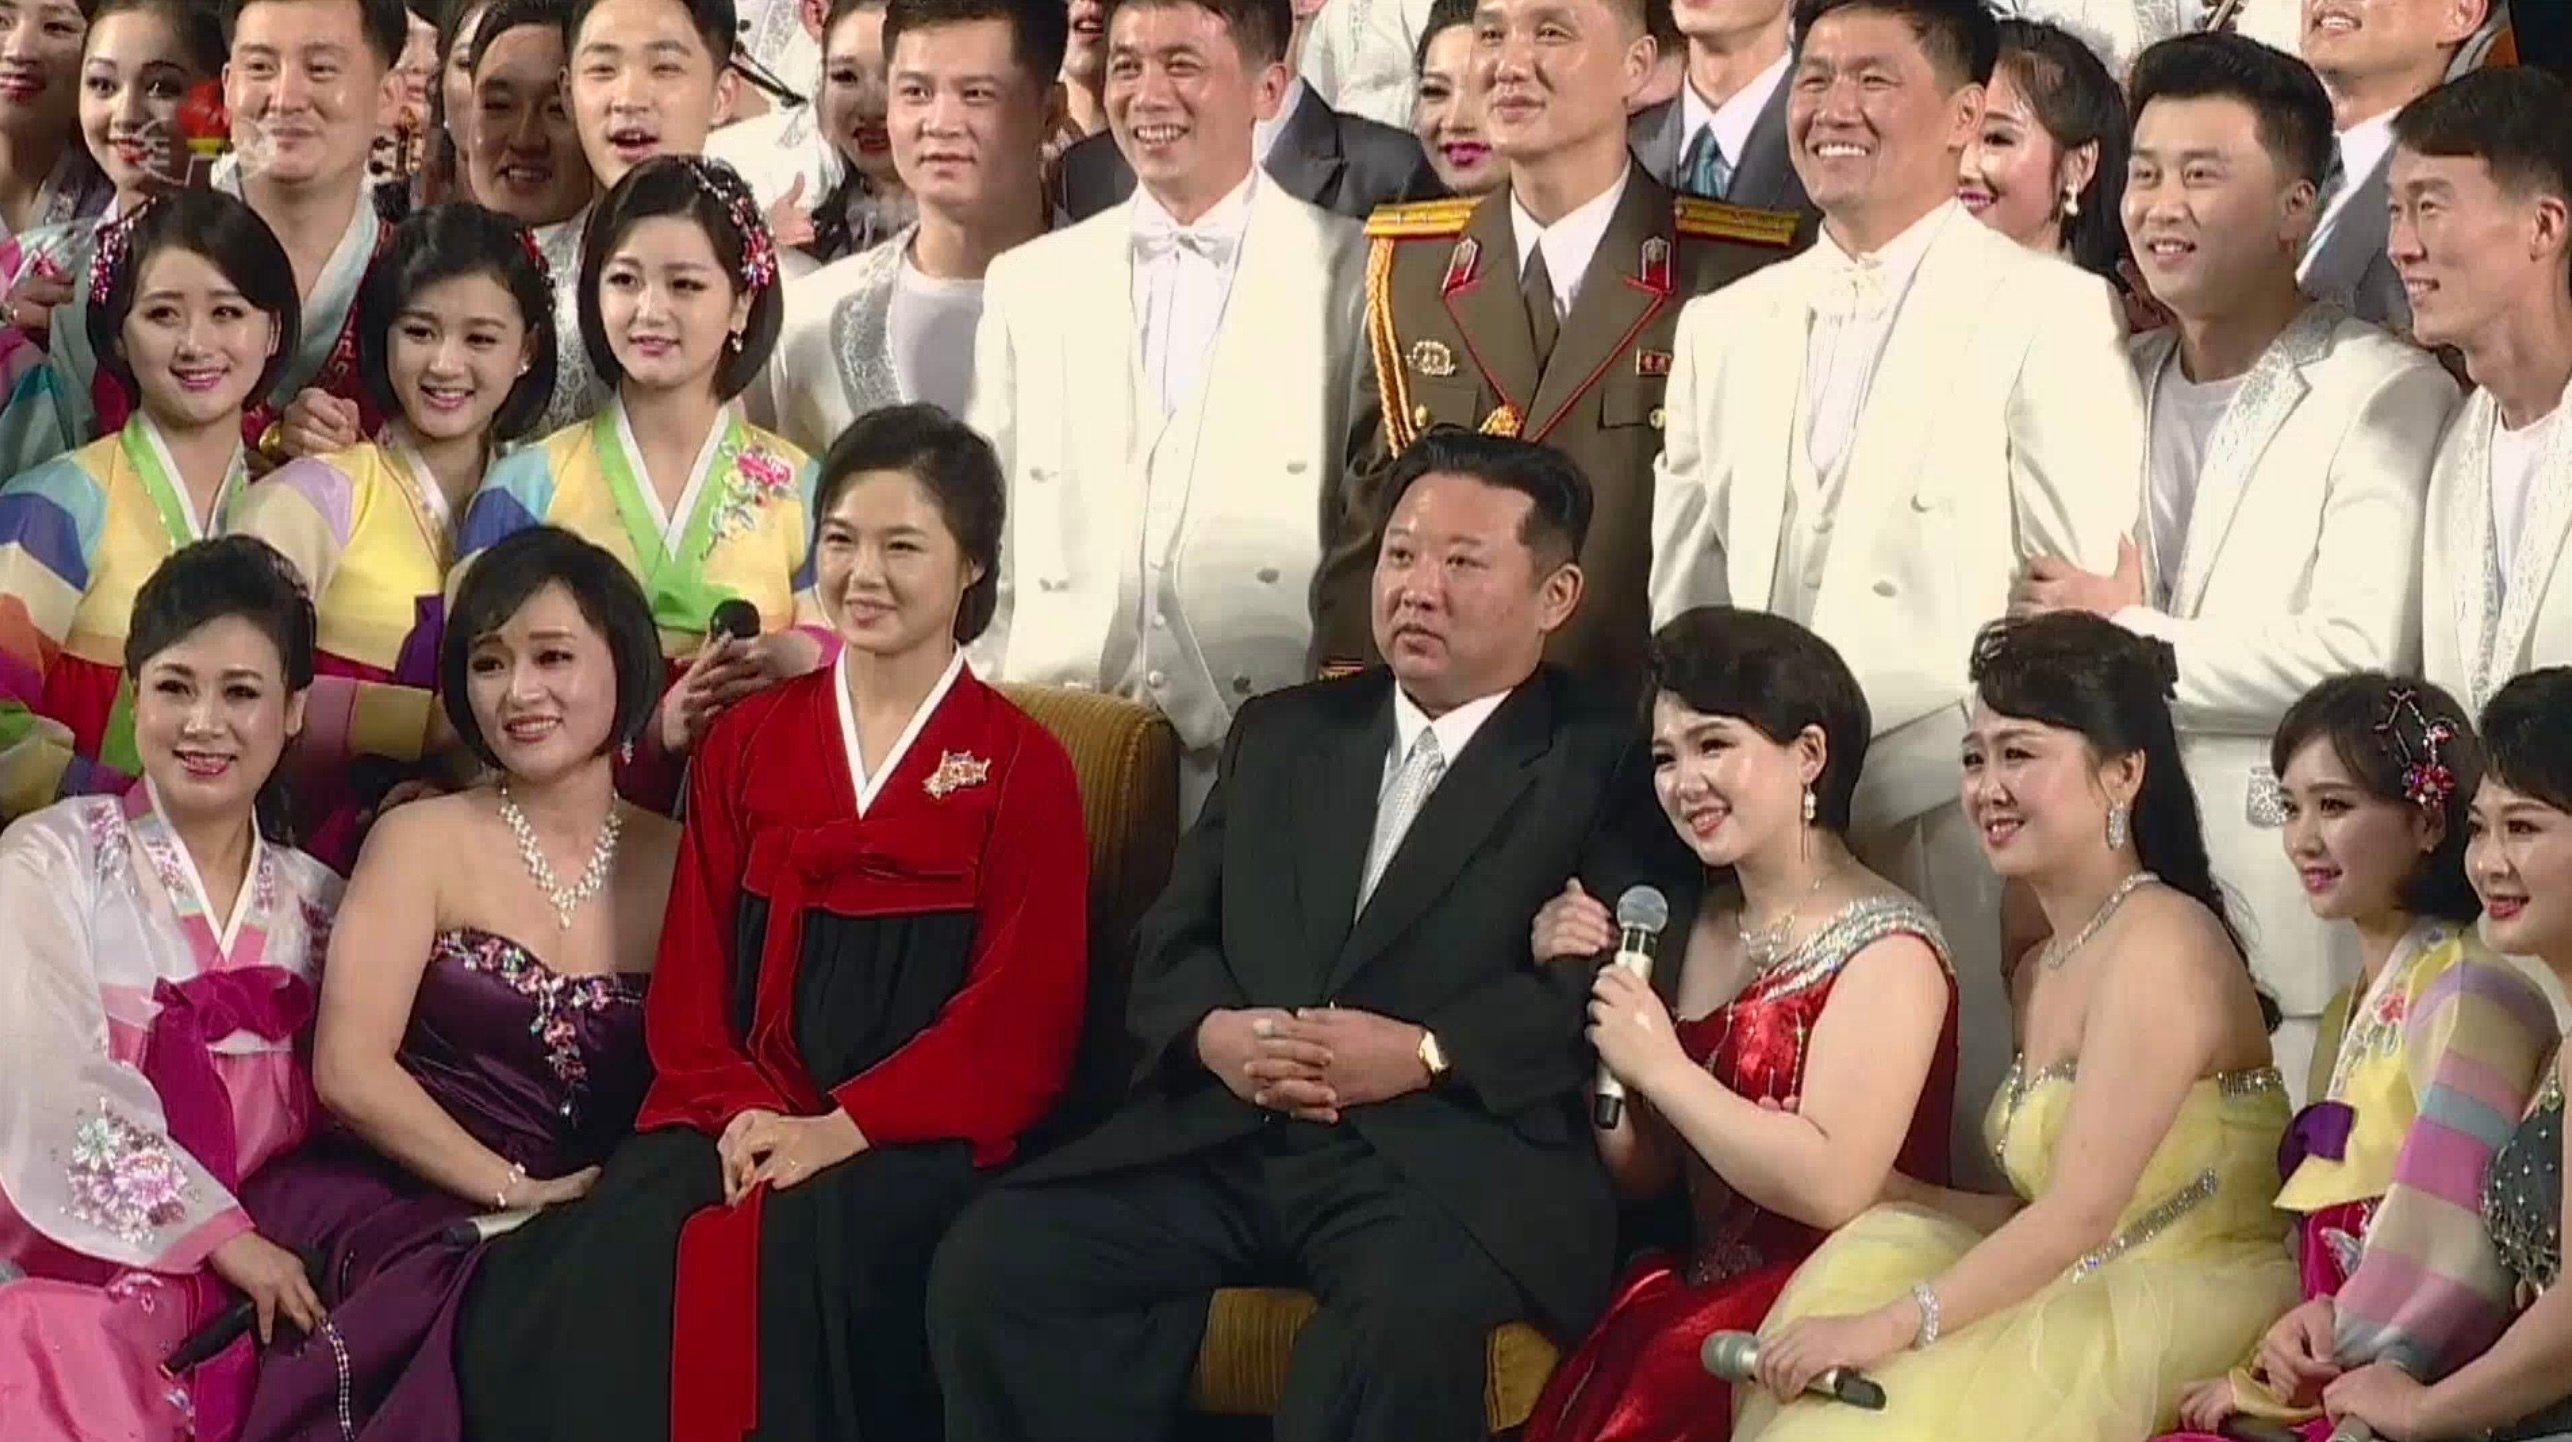 North Korean leader appears with wife